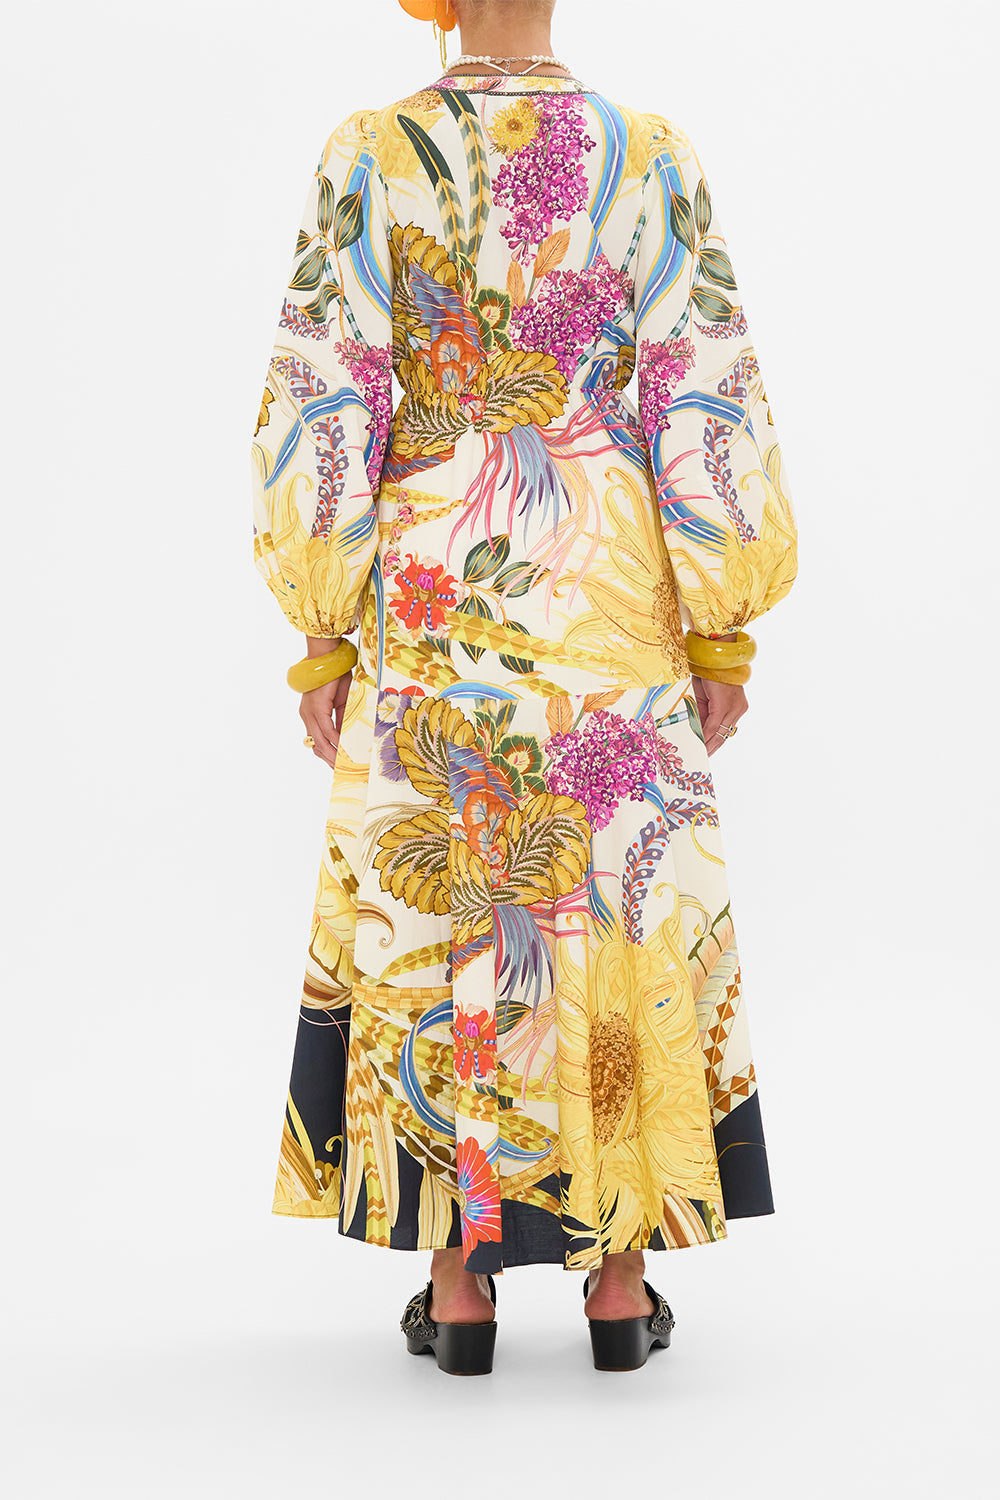 CAMILLA wrap dress in Sunflowers On My Mind print